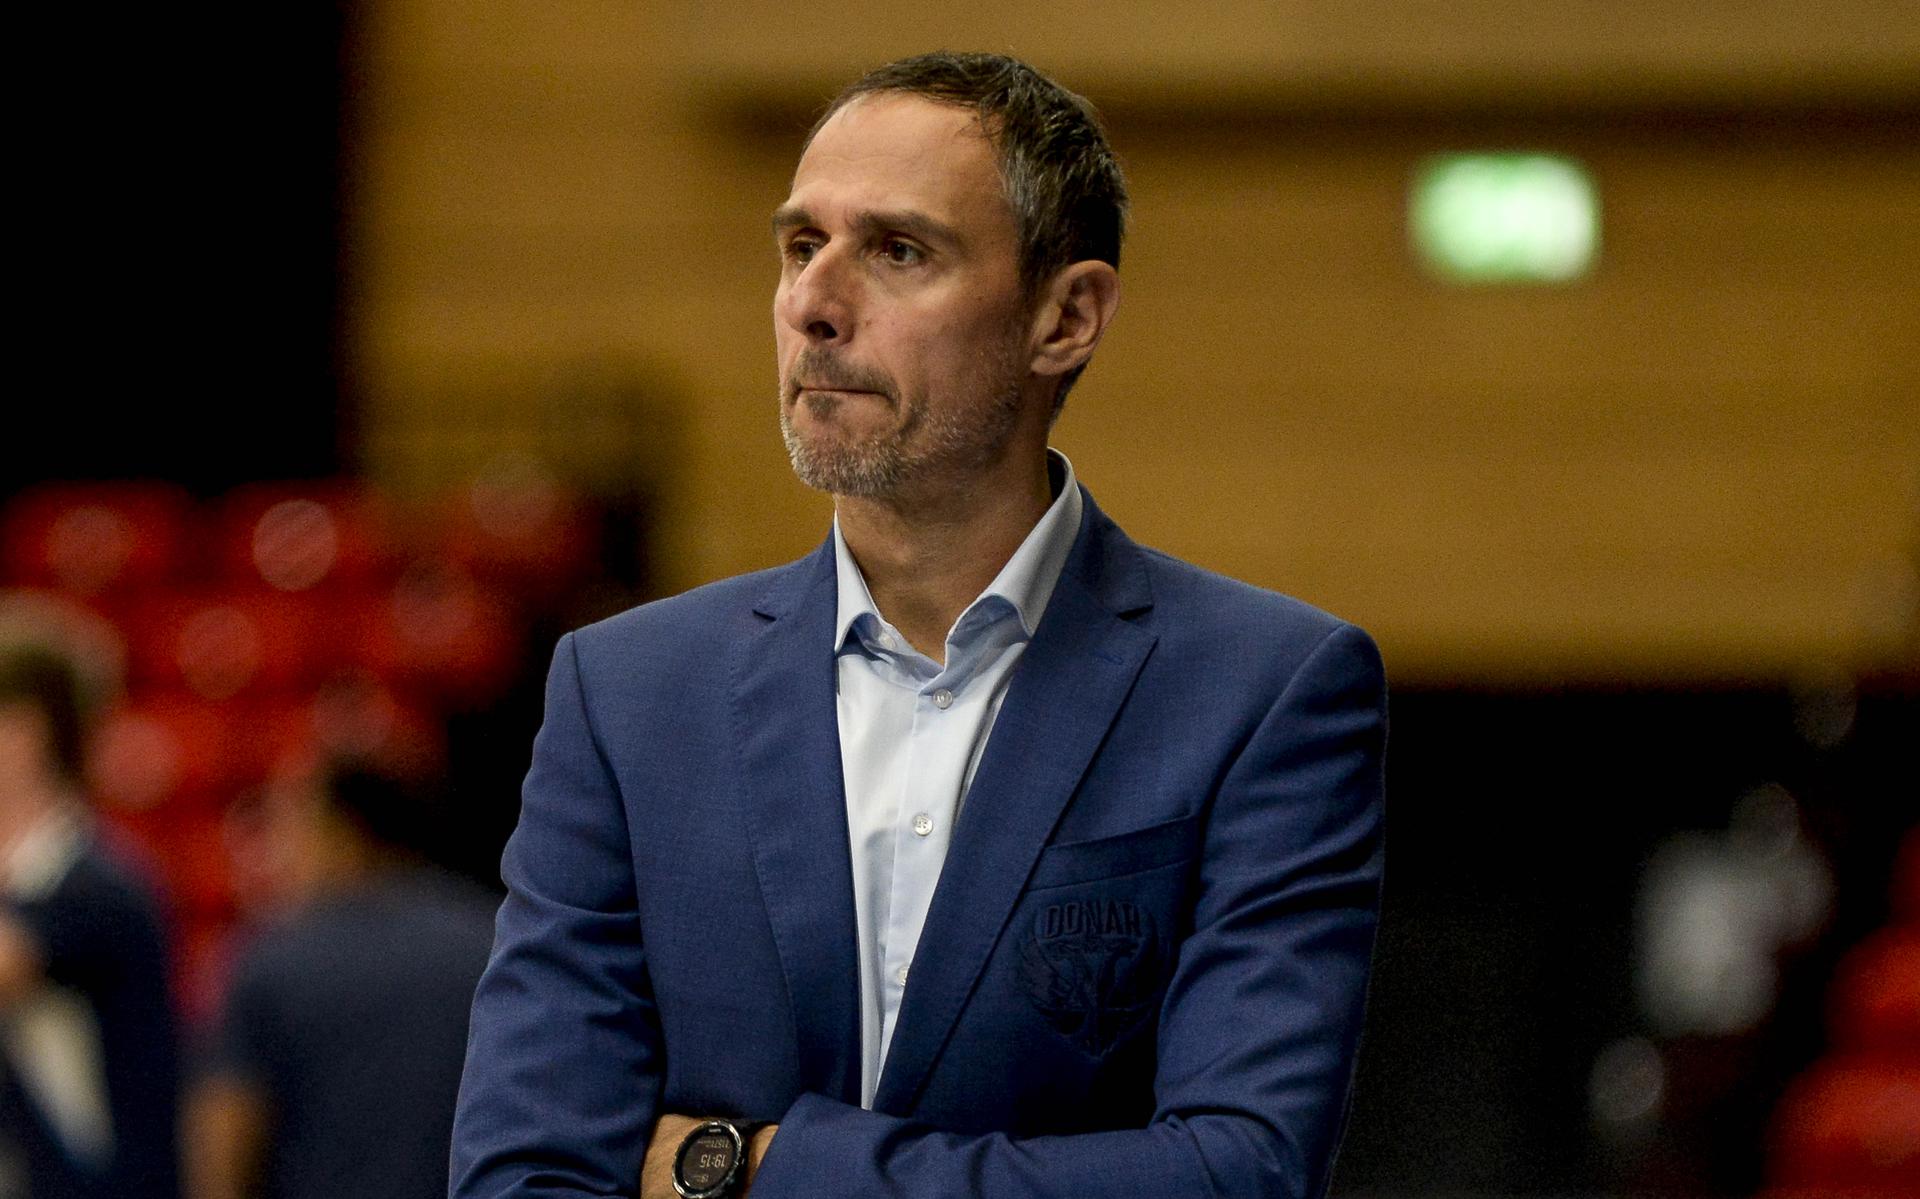 Donnar’s European ambitions could be put on hold, after the basketballers were eliminated from Groningen in Skopje